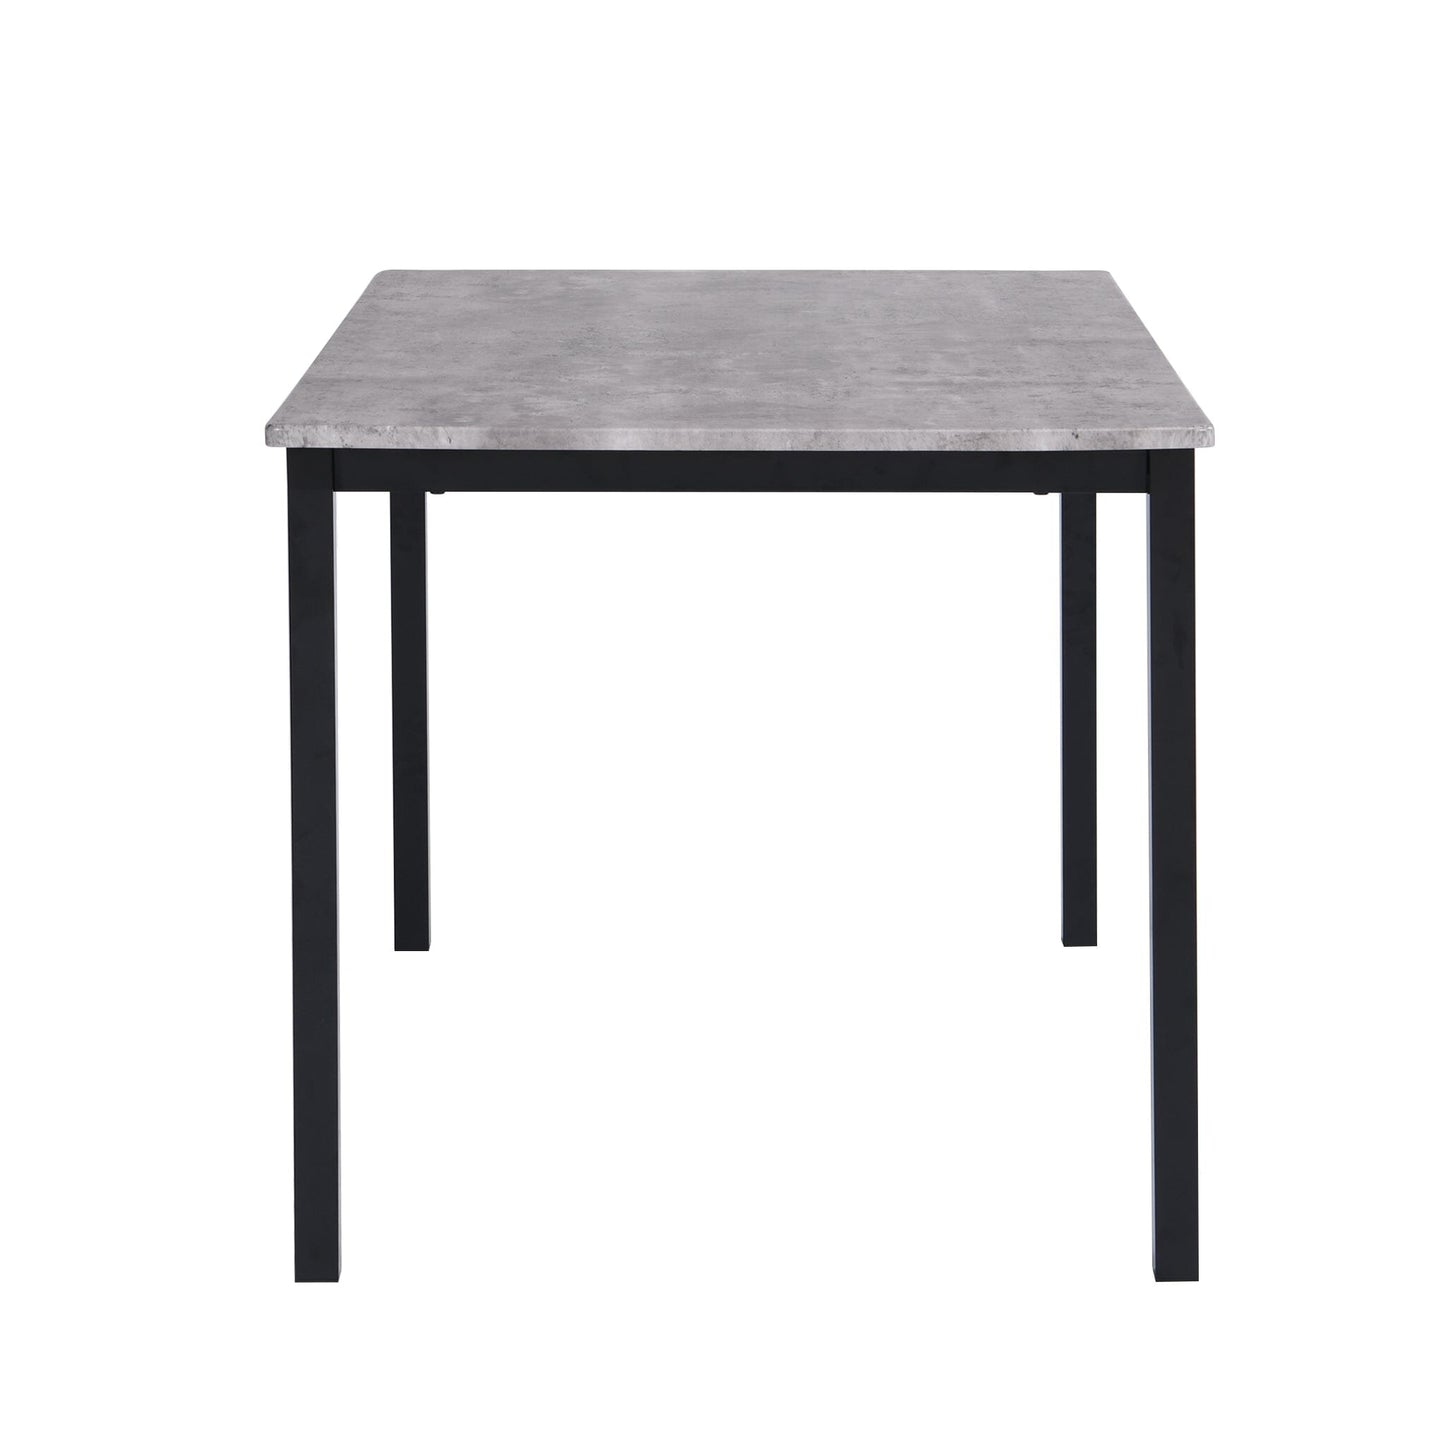 Milo Black Concrete Table effect Dining Table Set - 6 seater - Bella Teal and Black chairs set